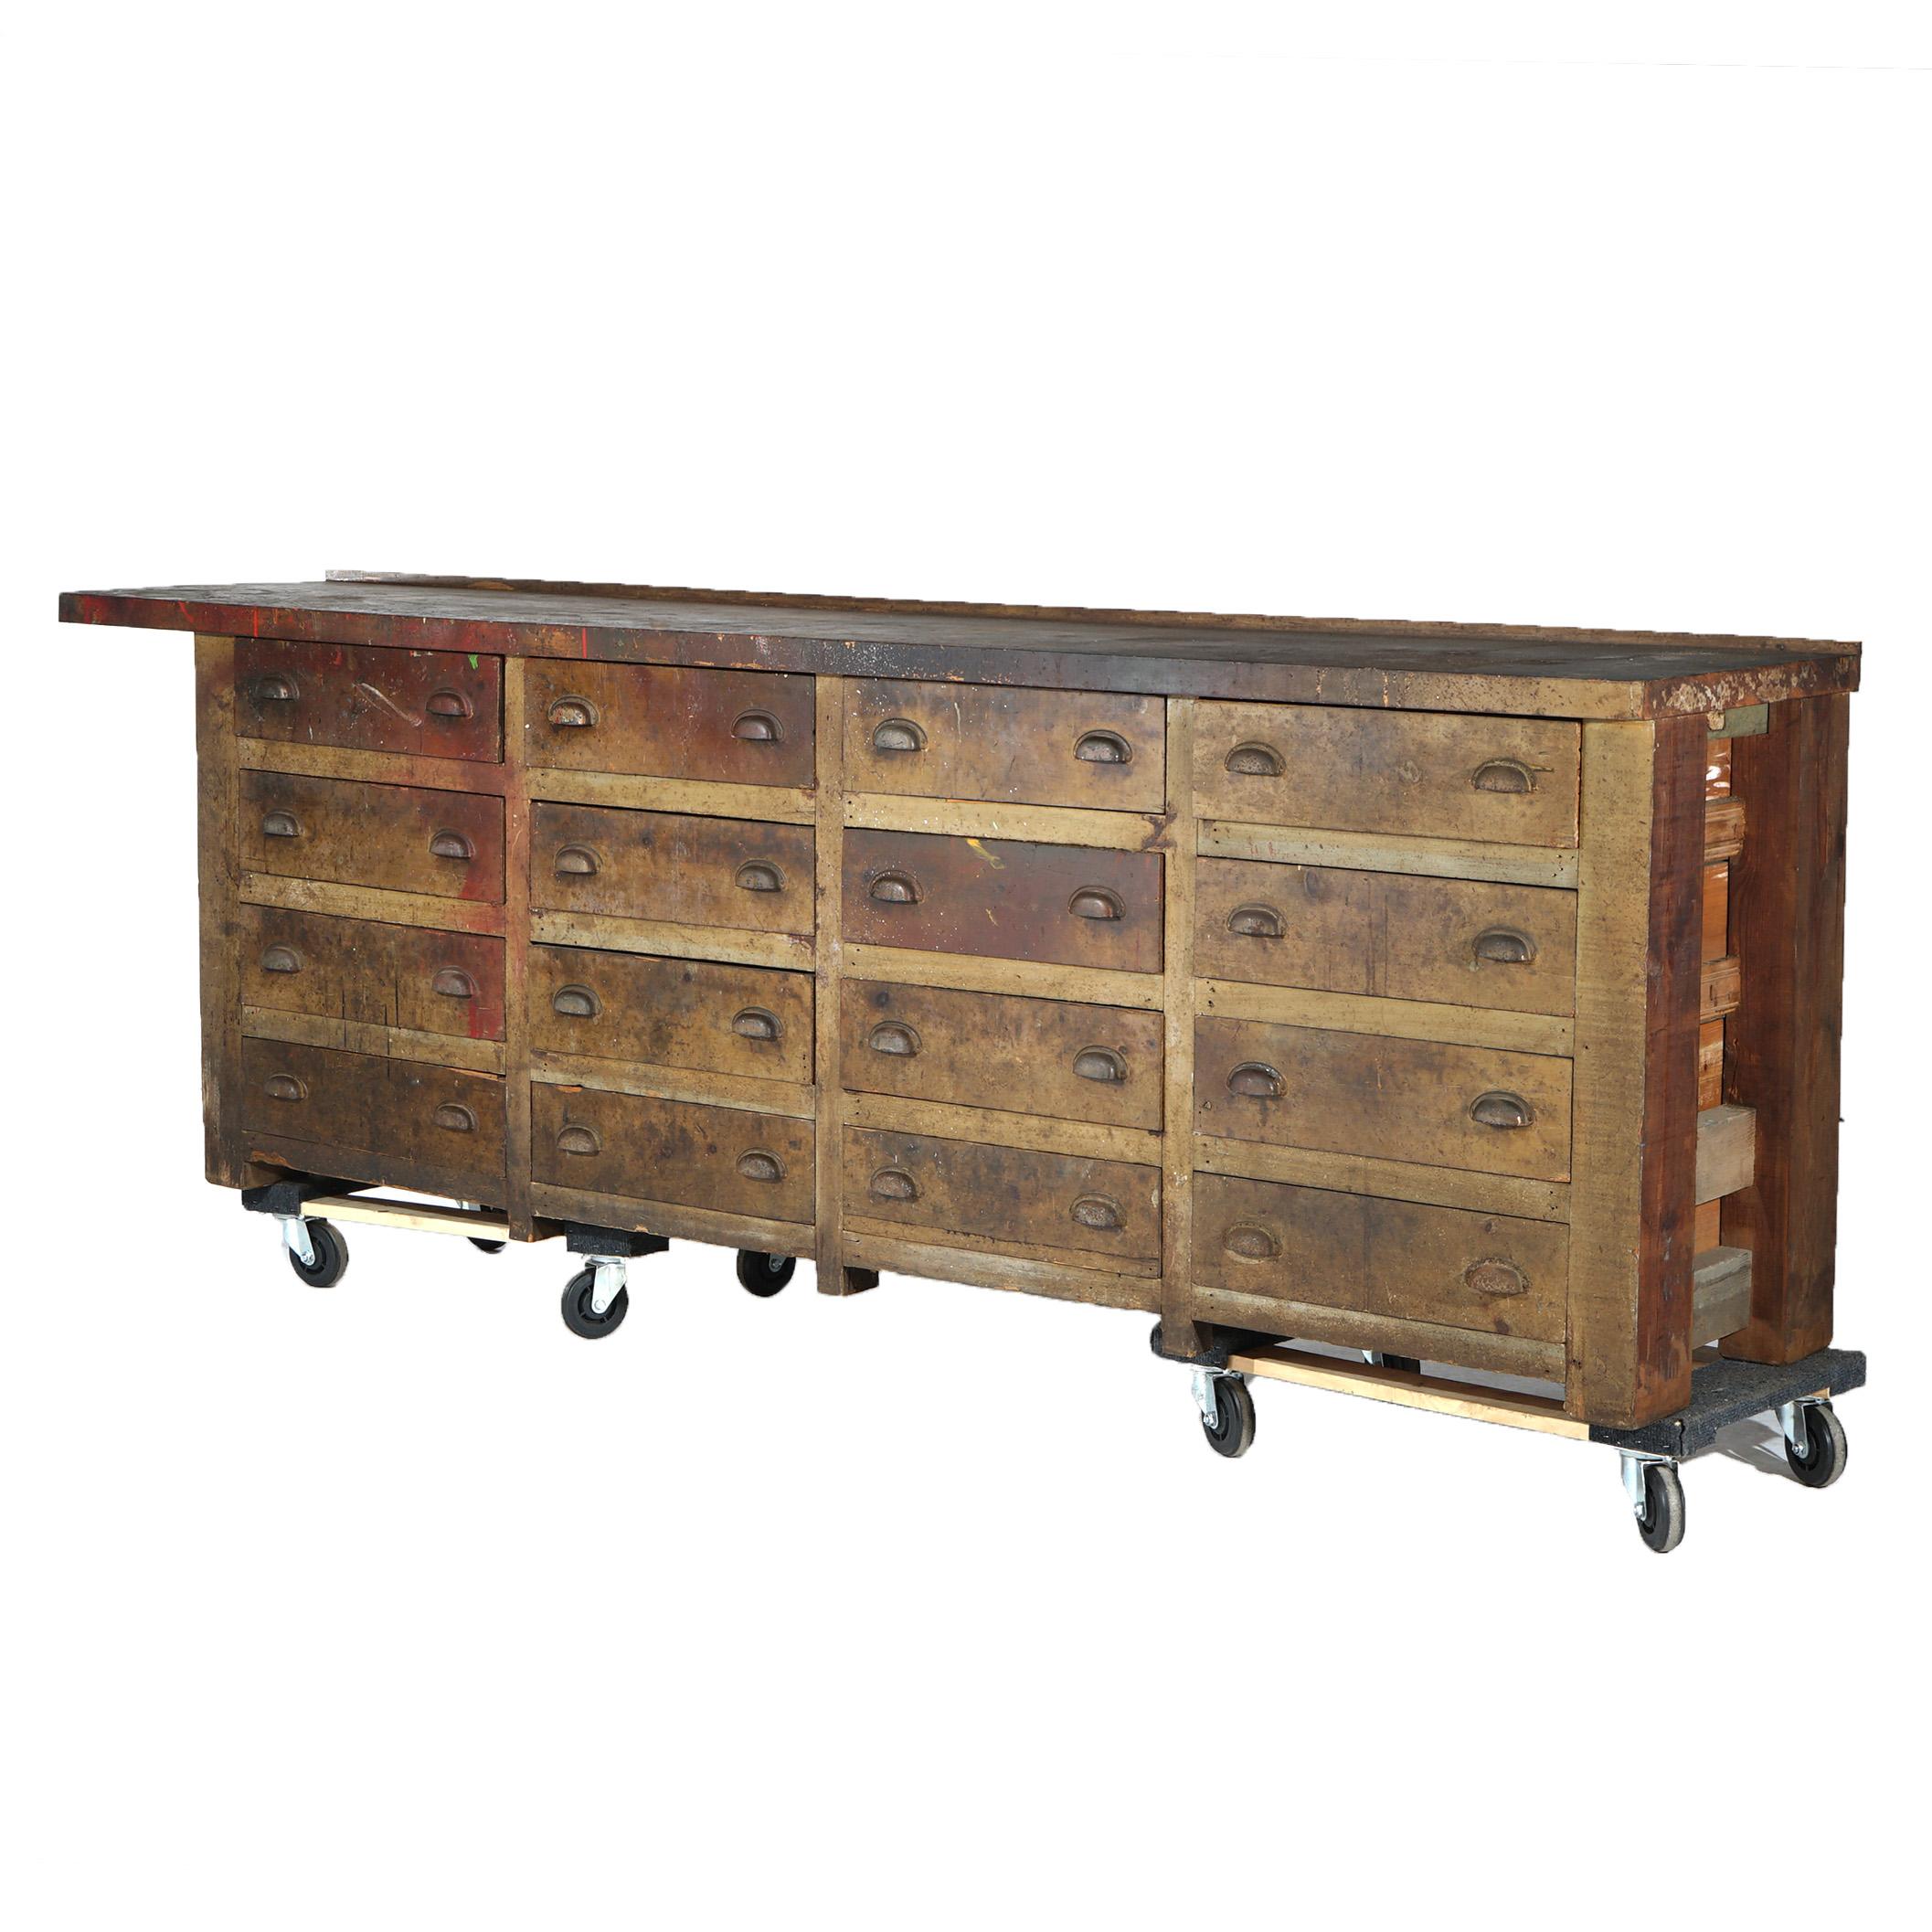 ***Ask About Discounted In-House Shipping***
Antique Country store tool bench offers softwood construction with sixteen drawers, c1930

Measures - 34